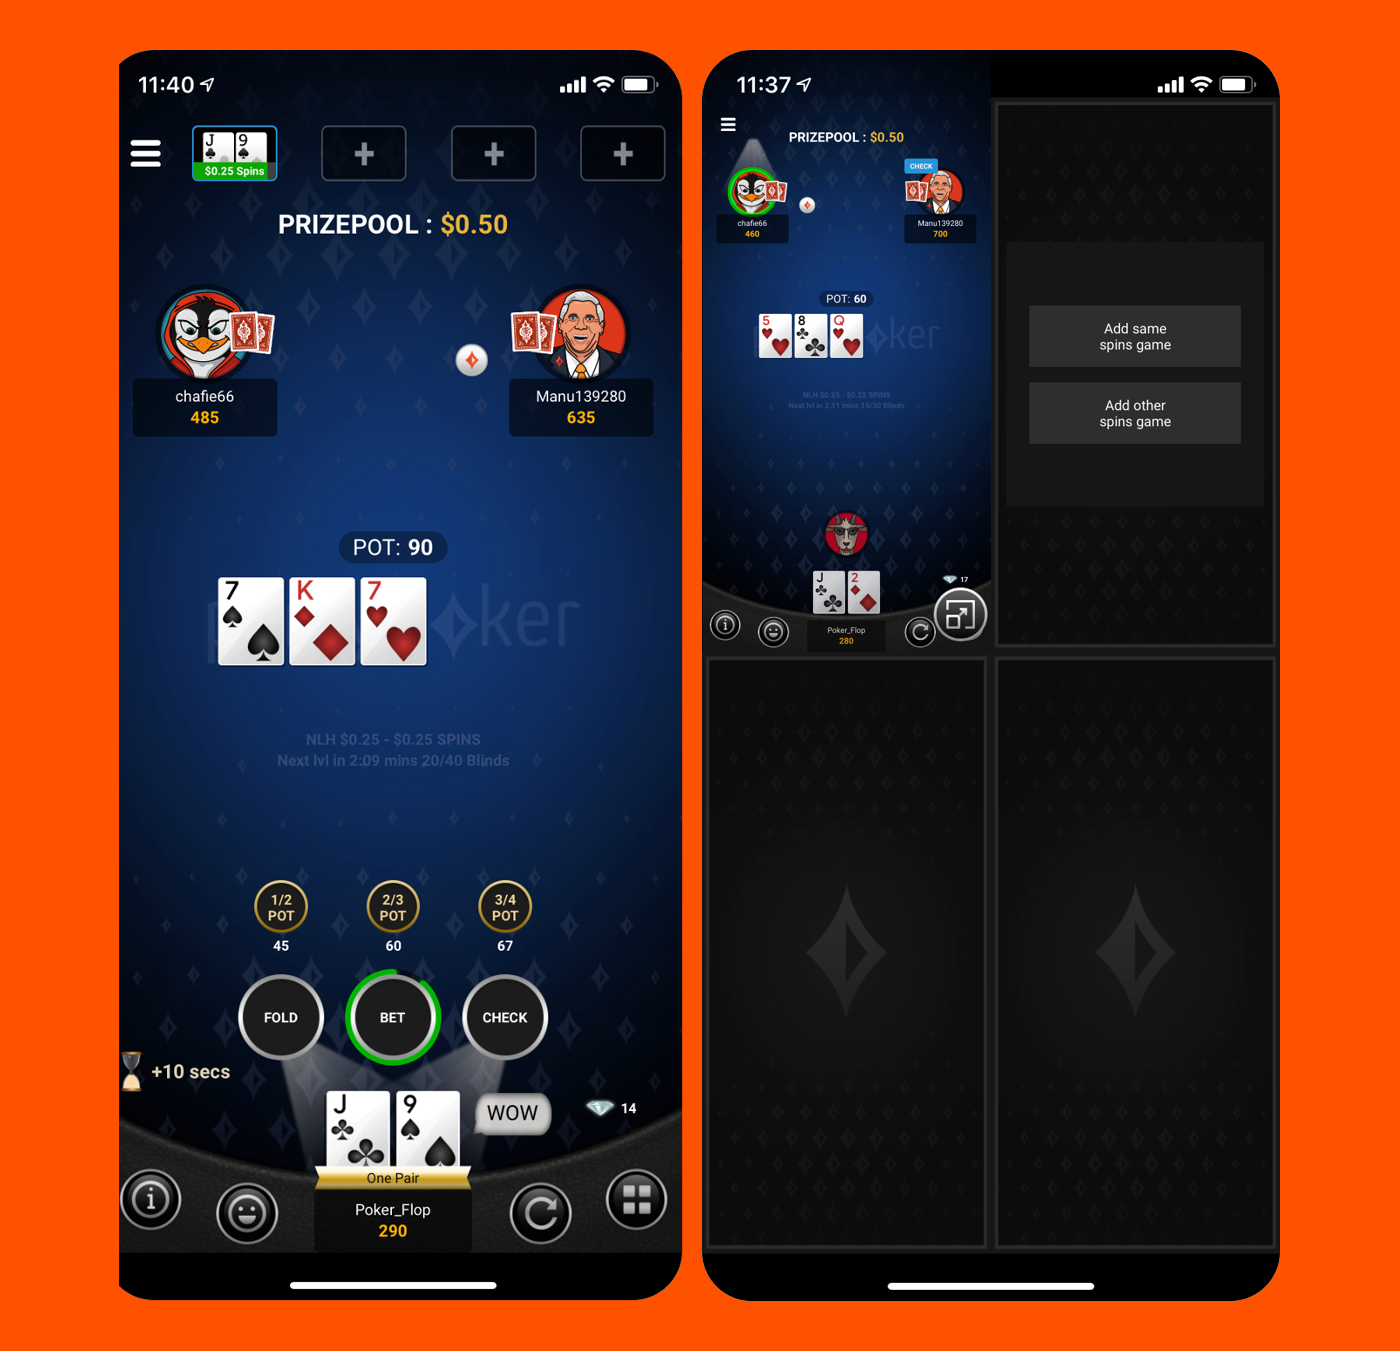 Partypoker's New Mobile App First Look: The Portrait Table